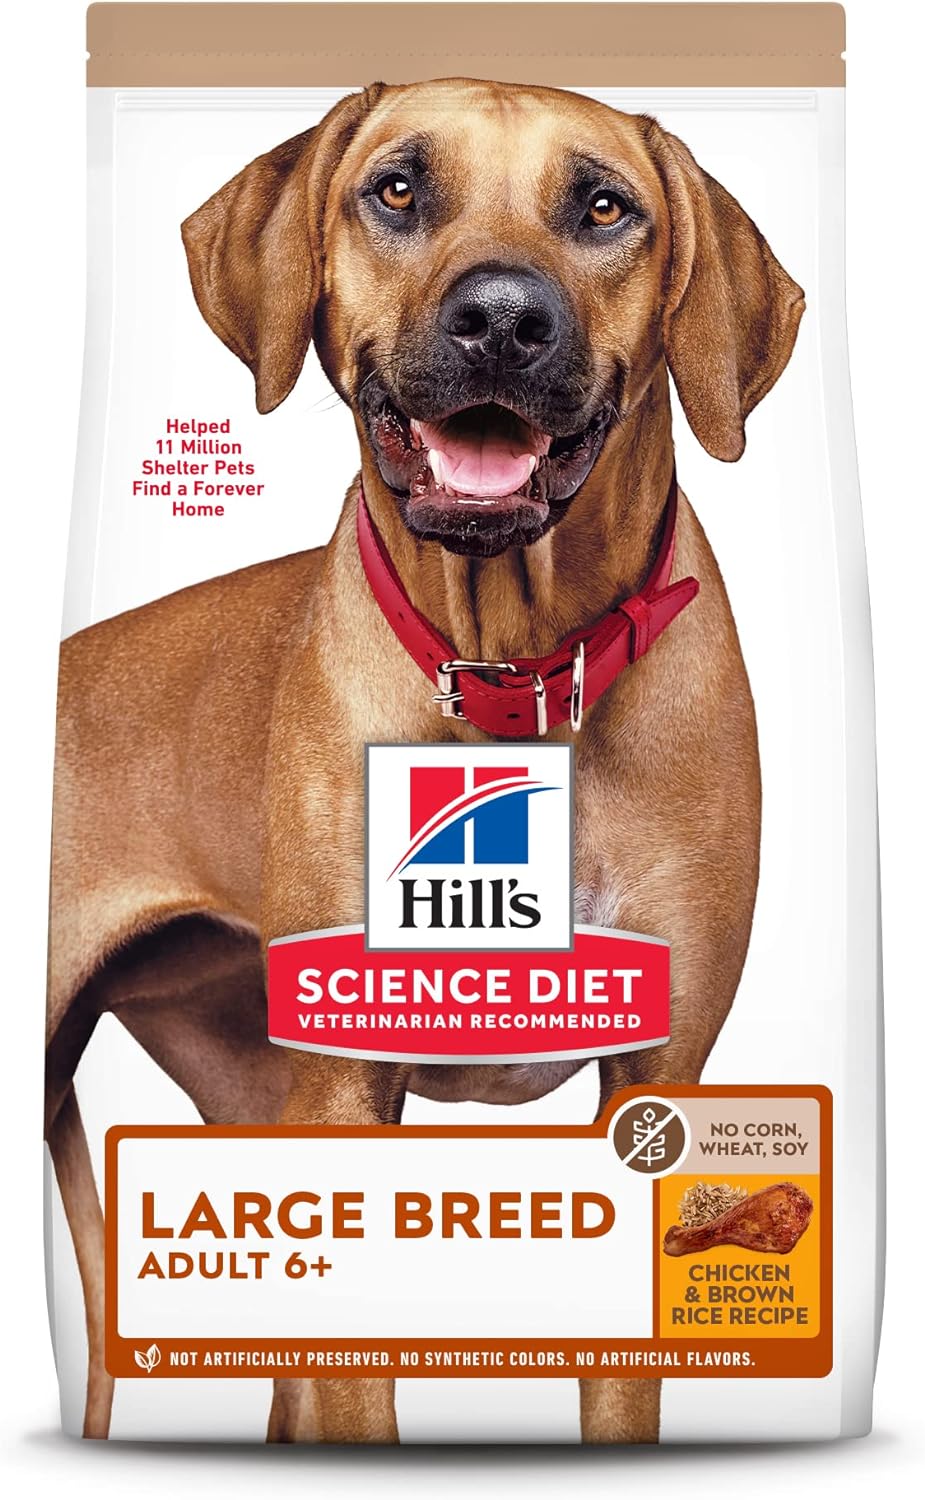 Hill’s Science Diet Adult 6+ Large Breed Chicken & Brown Rice Recipe No Corn, Wheat, Soy Dry Dog Food – Gallery Image 1